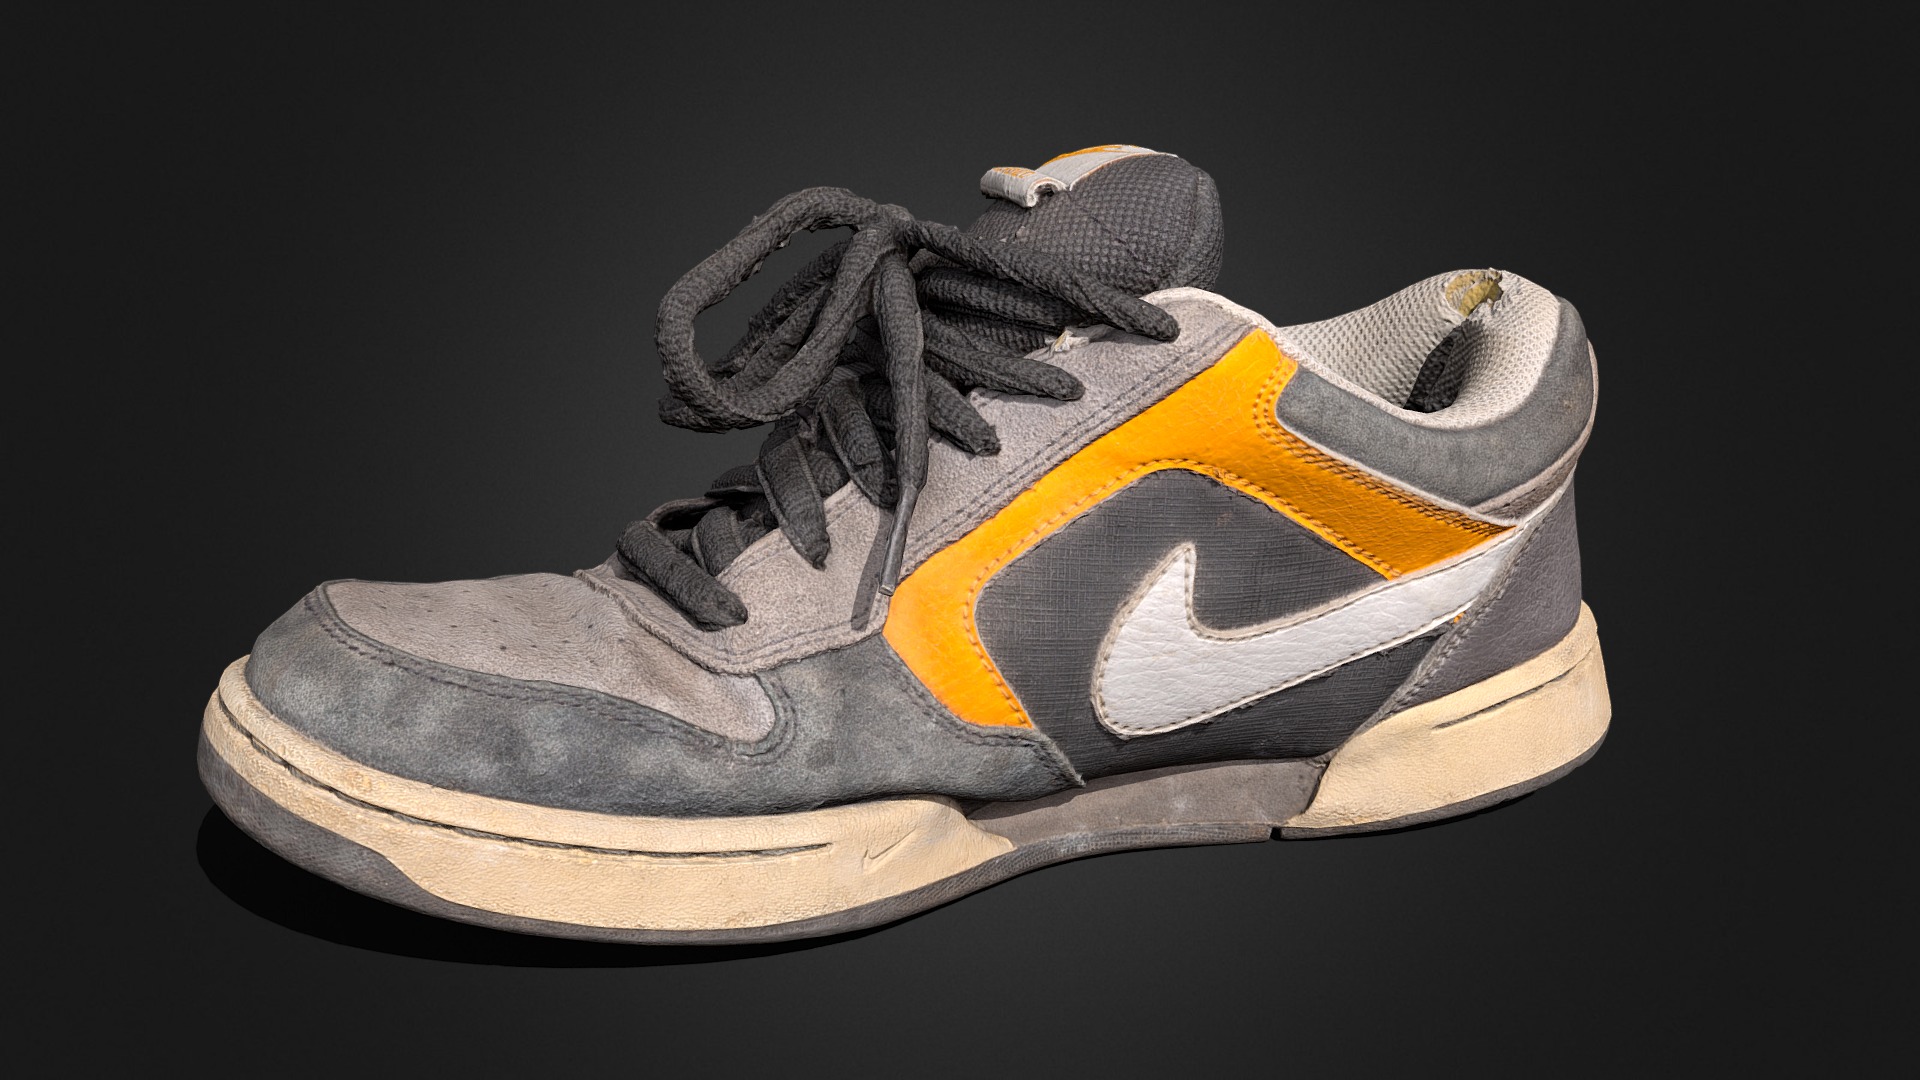 3D model Nike Renzo (used) - This is a 3D model of the Nike Renzo (used). The 3D model is about a pair of shoes.